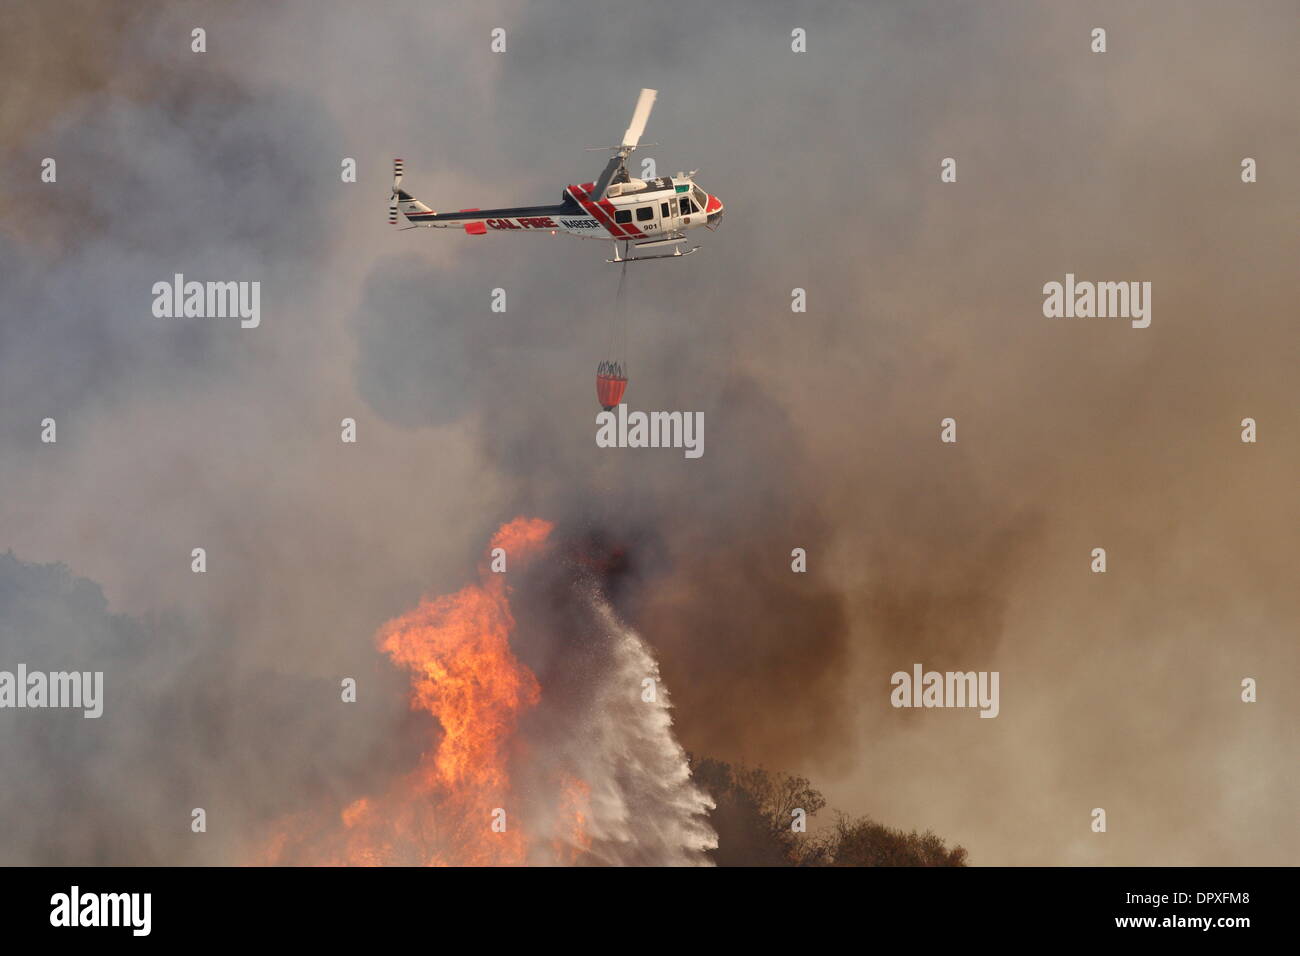 Glendora, California, USA. 16th January 2014. A large wildfire burns out of control in the hills above Glendora. Firefighters, helicopters and aircraft from many jurisdictions work to control the blaze. Credit:  Nicholas Burningham/Alamy Live News Stock Photo